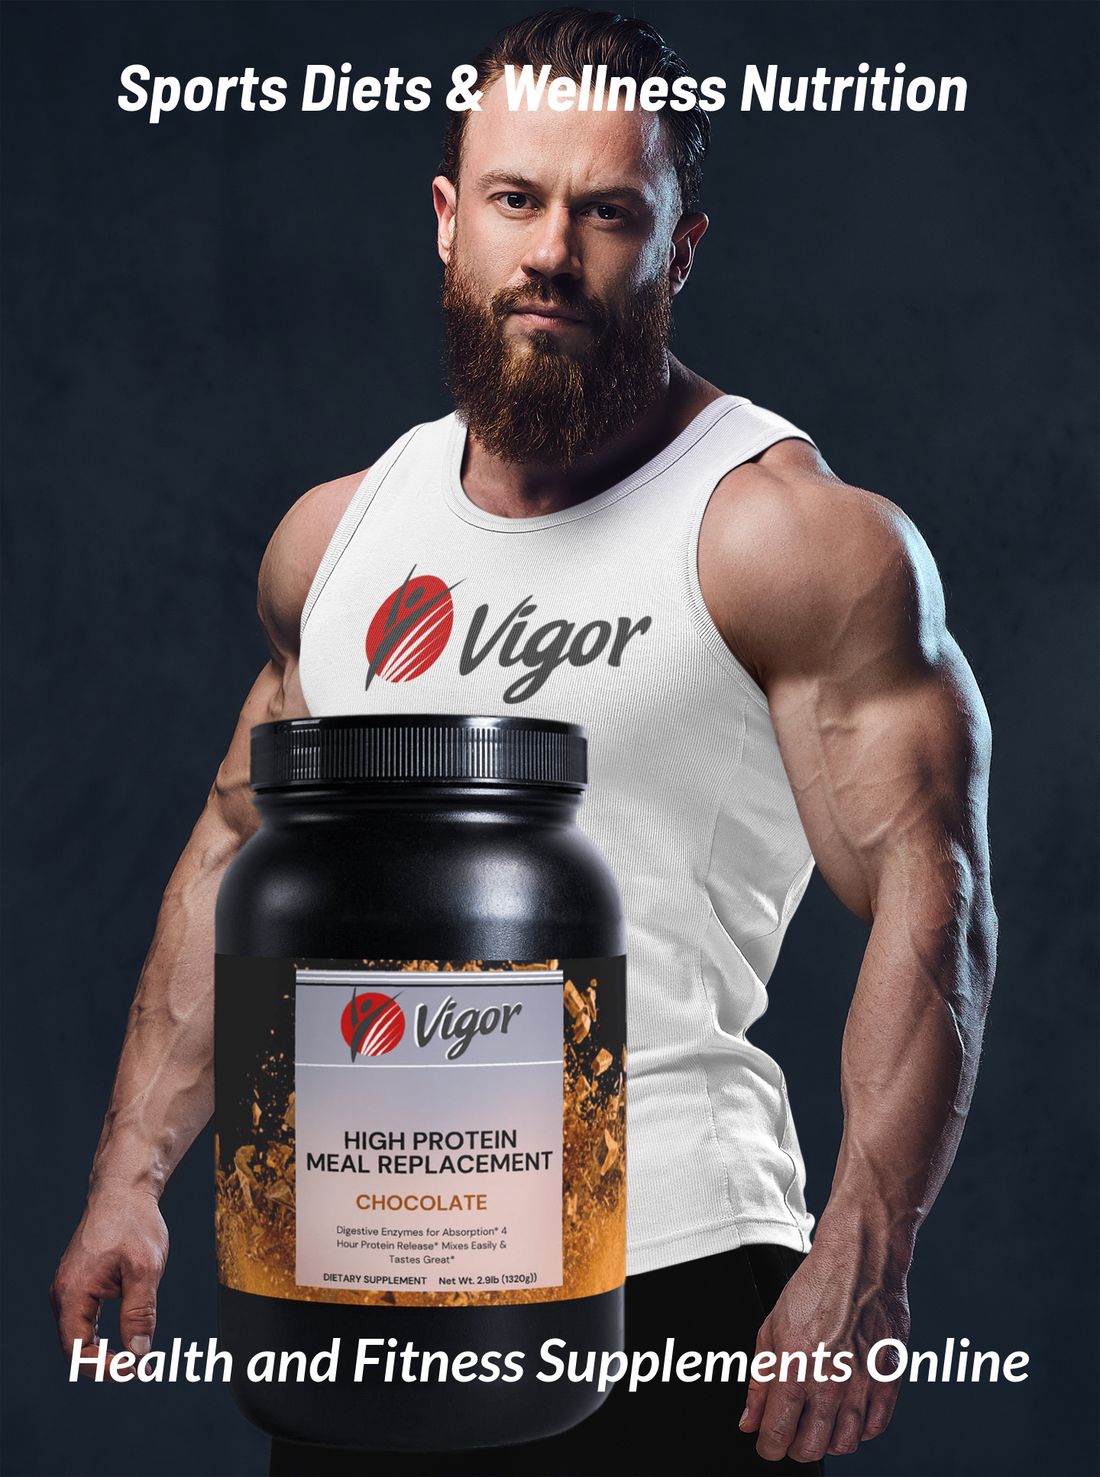 Sports diets and wellness nutrition poster of vigor health & fitness supplements featuring a fit man with muscular arms announcing high protein meal replacement.